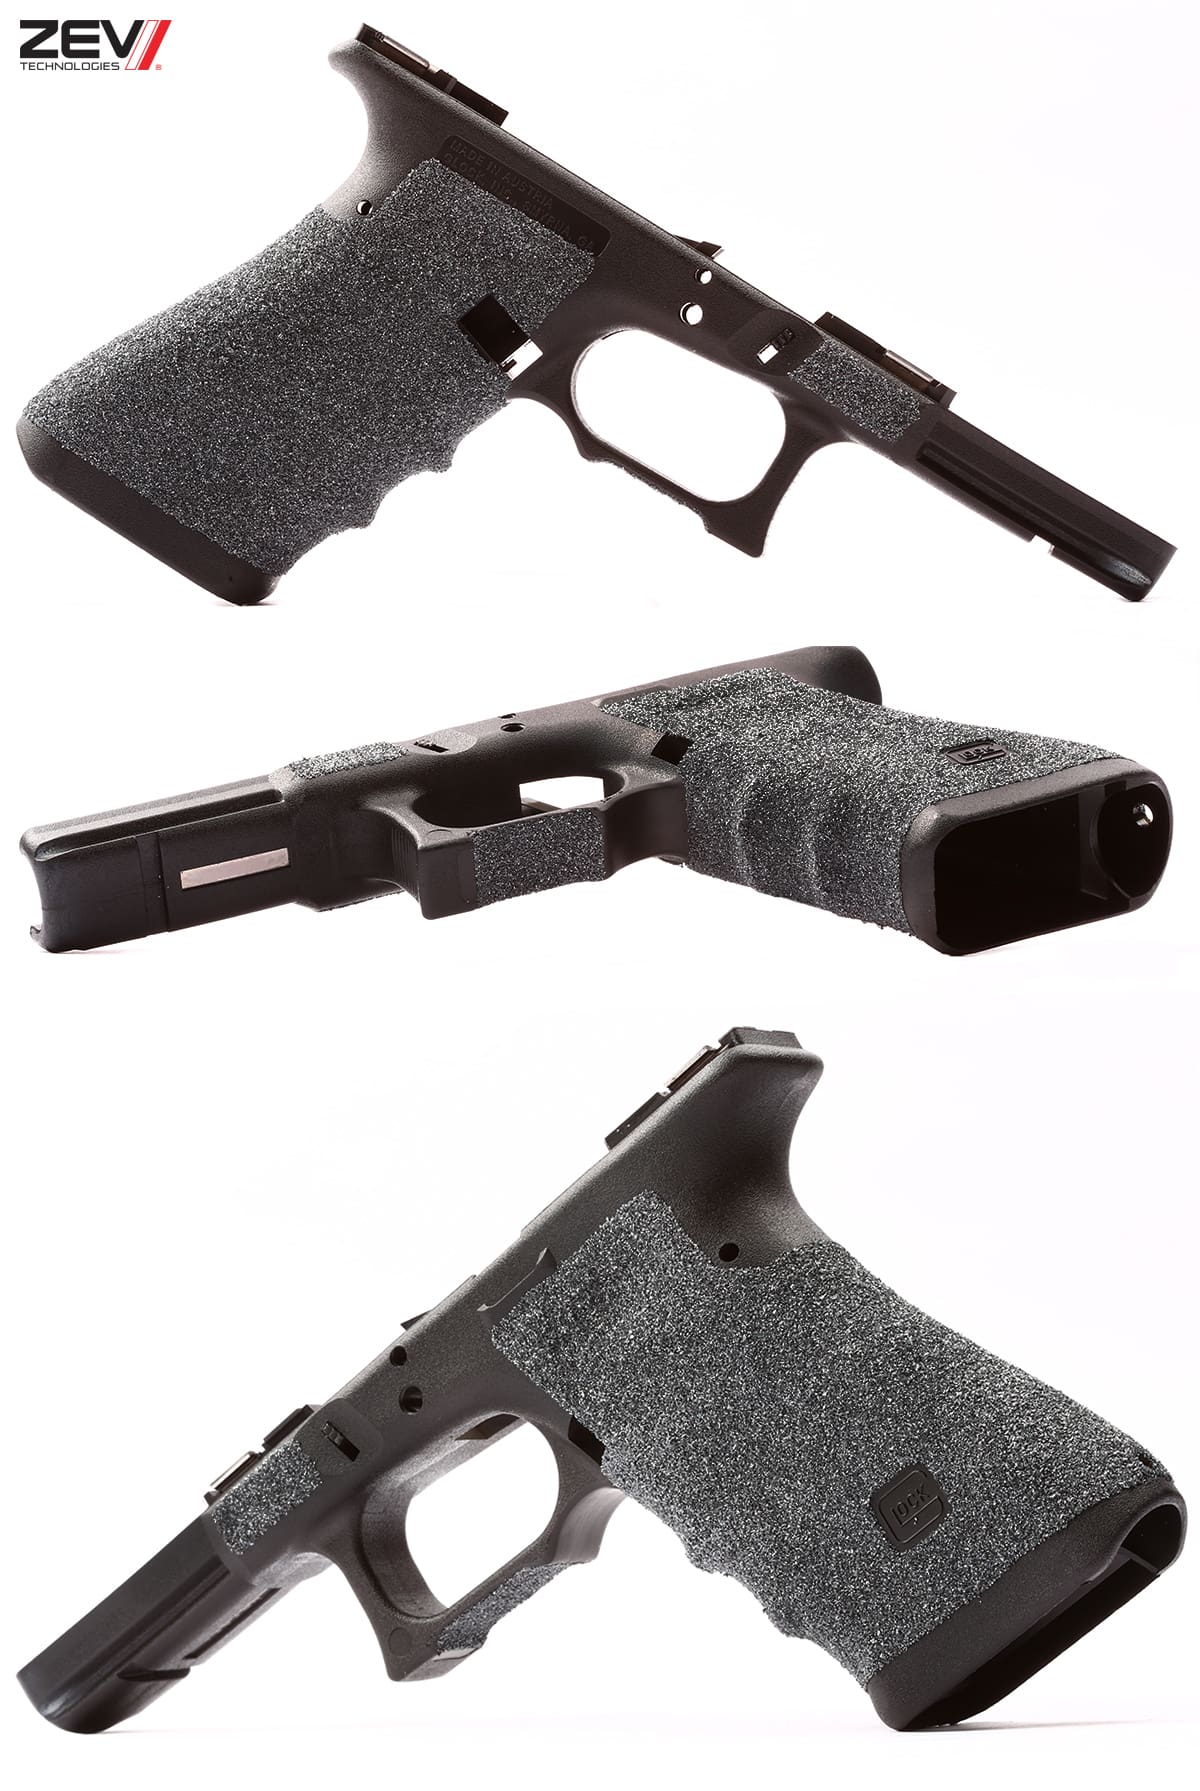 The Zev Technologies Experience Grip Reduction And Frame